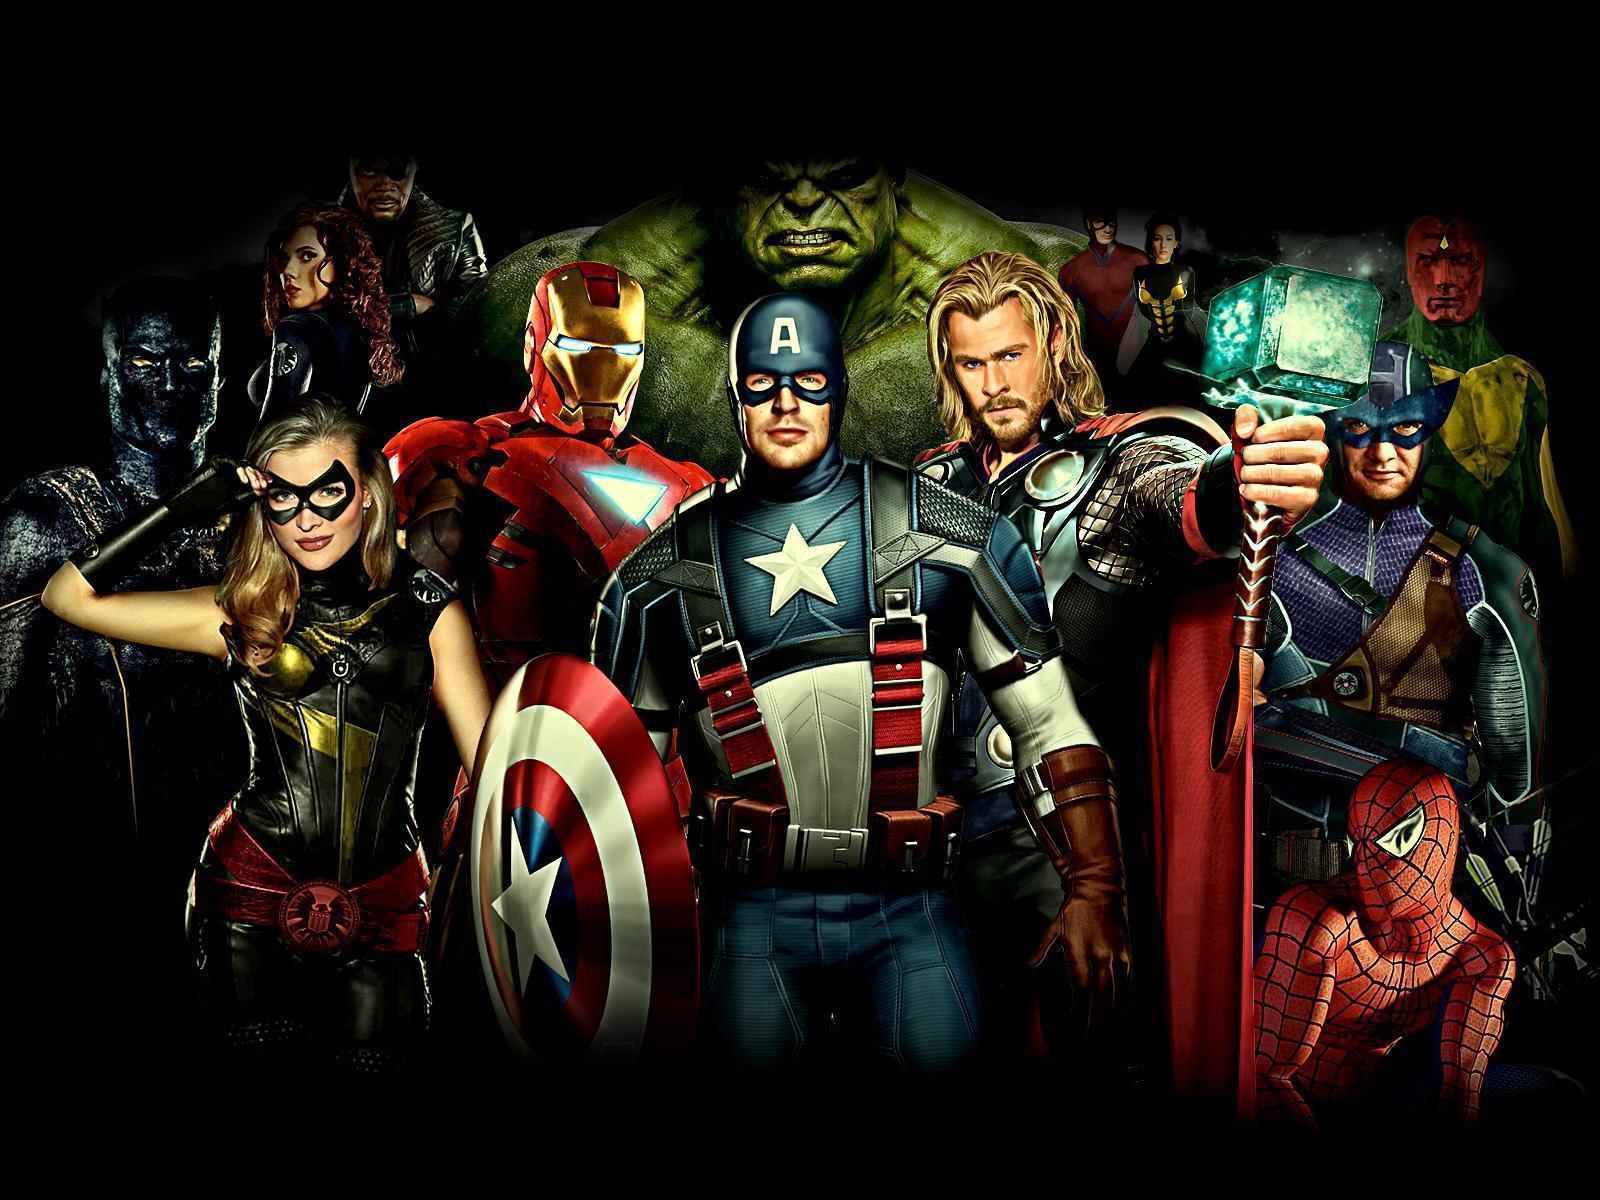 The Avengers download the new